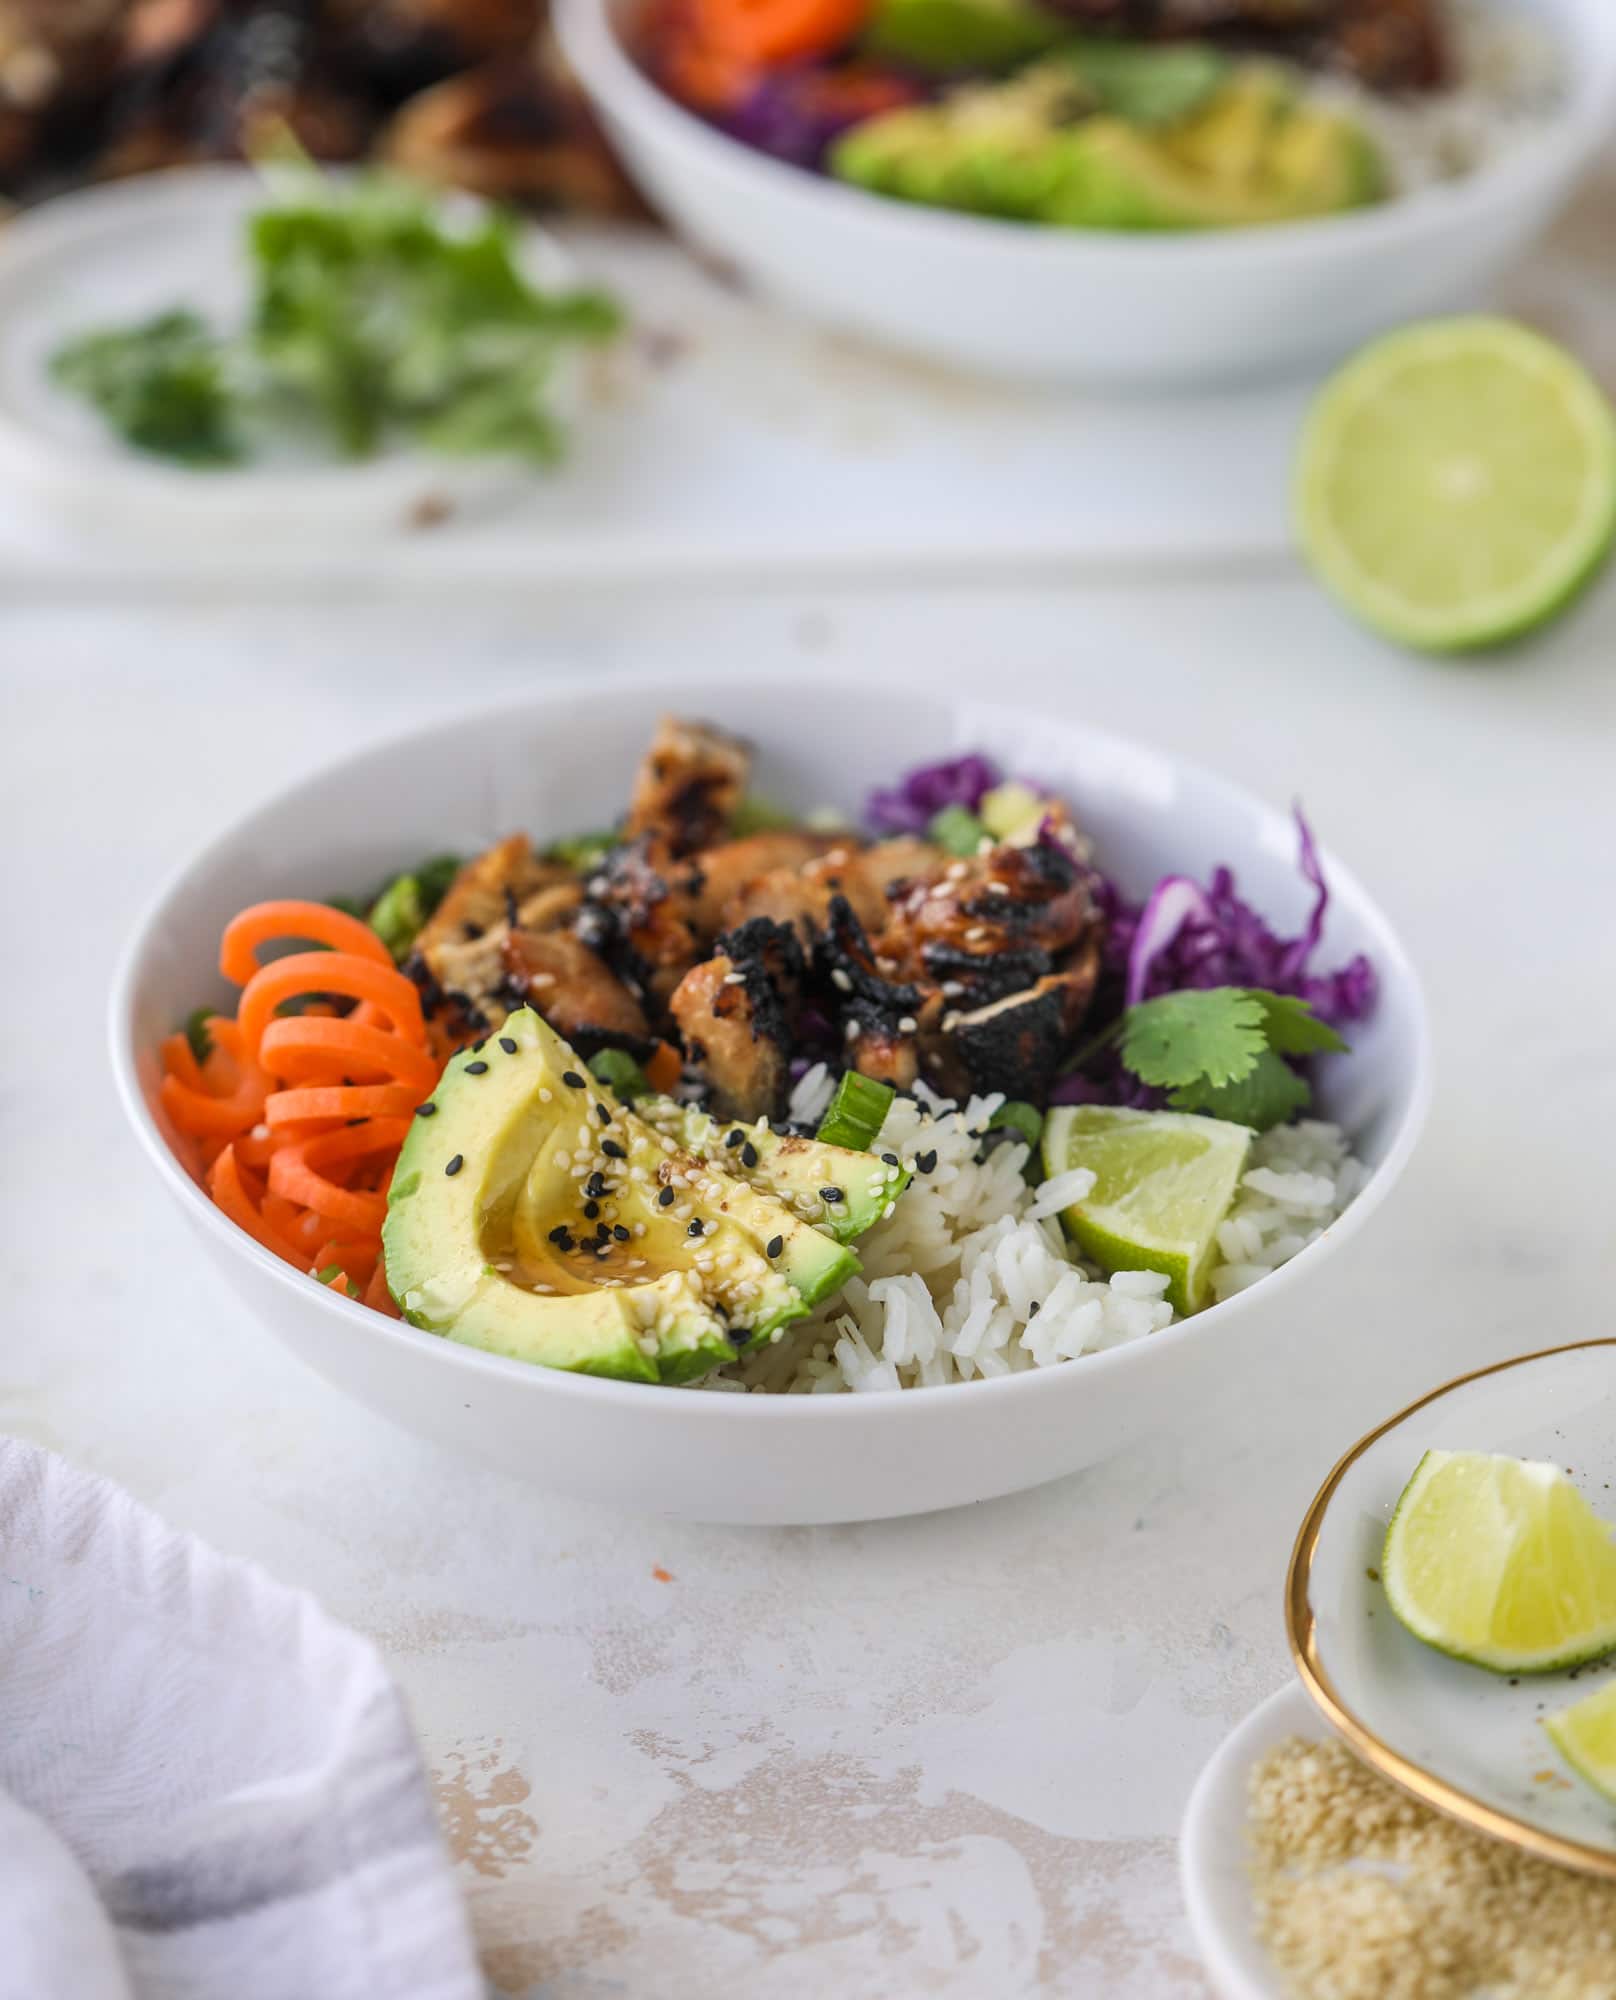 Korean chicken bowls are loaded with flavor: toasted sesame, soy sauce and lime come together over coconut rice and avocado to create a delicious meal! I howsweeteats.com #korean #chicken